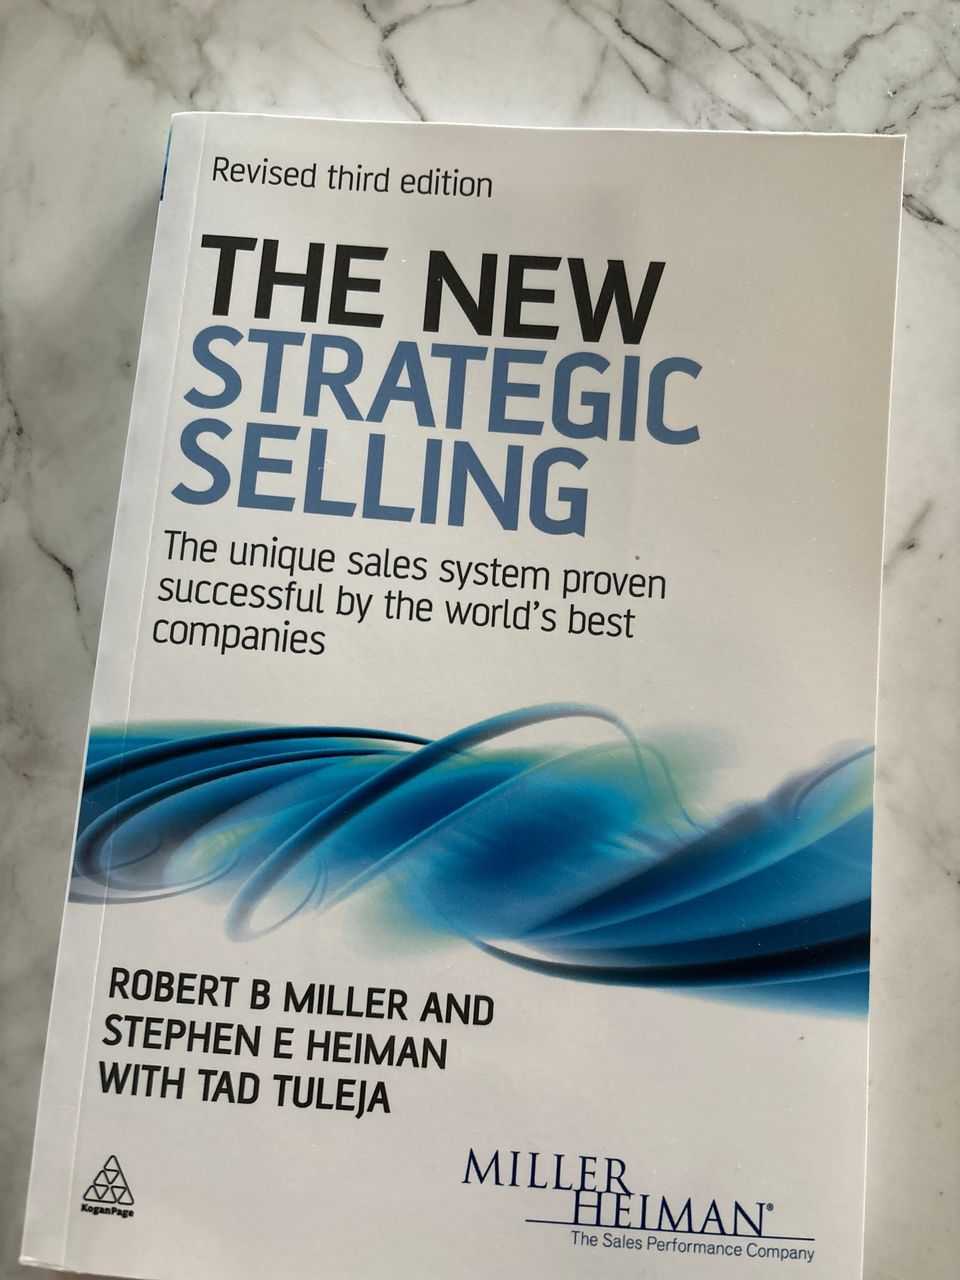 The New Strategic Selling - third edition